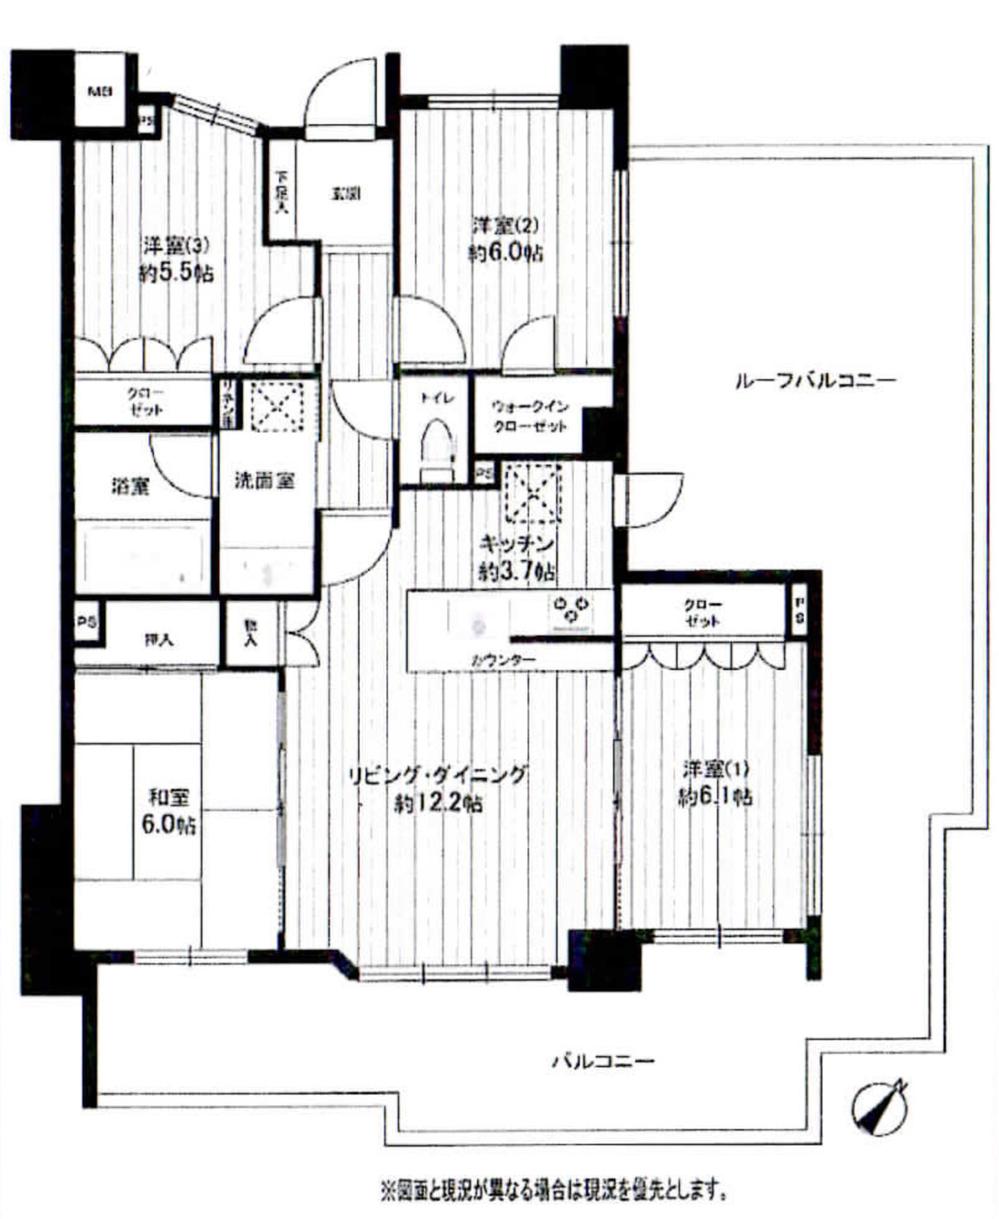 Floor plan. 4LDK, Price 26,800,000 yen, Occupied area 87.08 sq m , Balcony area 19.23 sq m in peace in 4LDK after-sales service guaranteed apartment with large roof balcony you will Osumai.